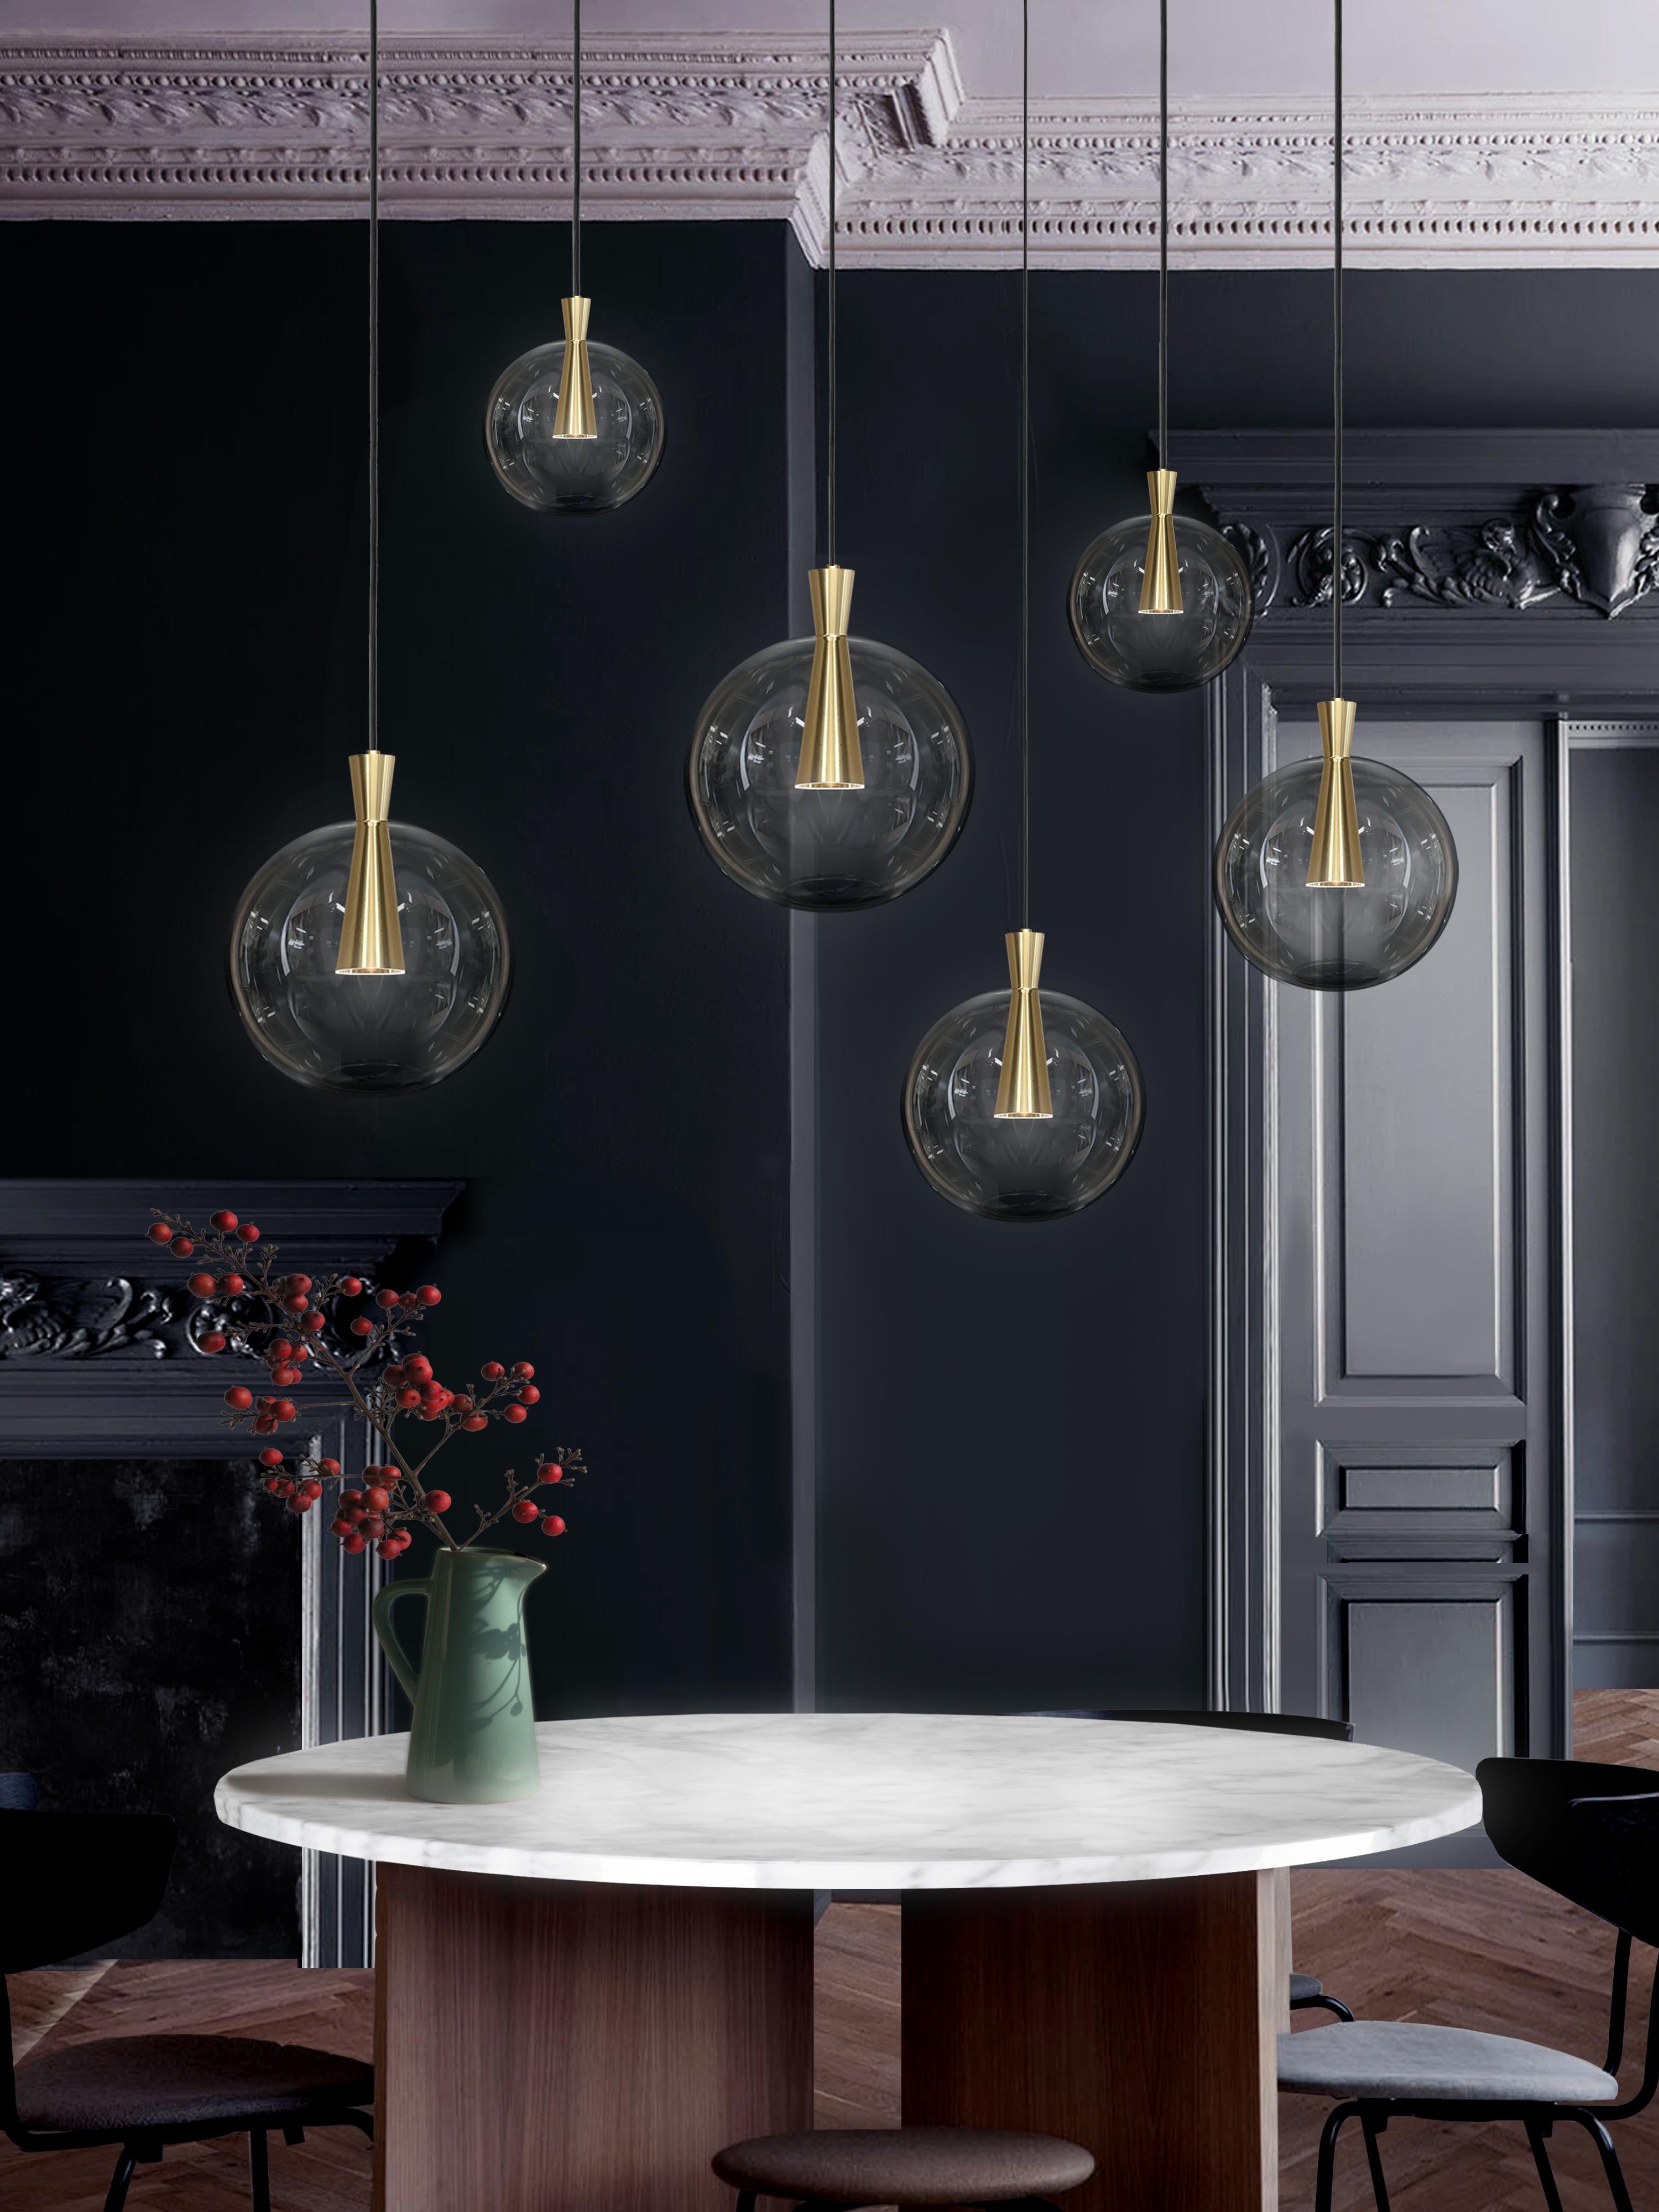 Cone is designed to showcase the beauty and timeless elegance of geometrical symmetry. Each cone is machined from a solid block of brass, with a hand-blown glass shade delicately suspended from the cones apex.